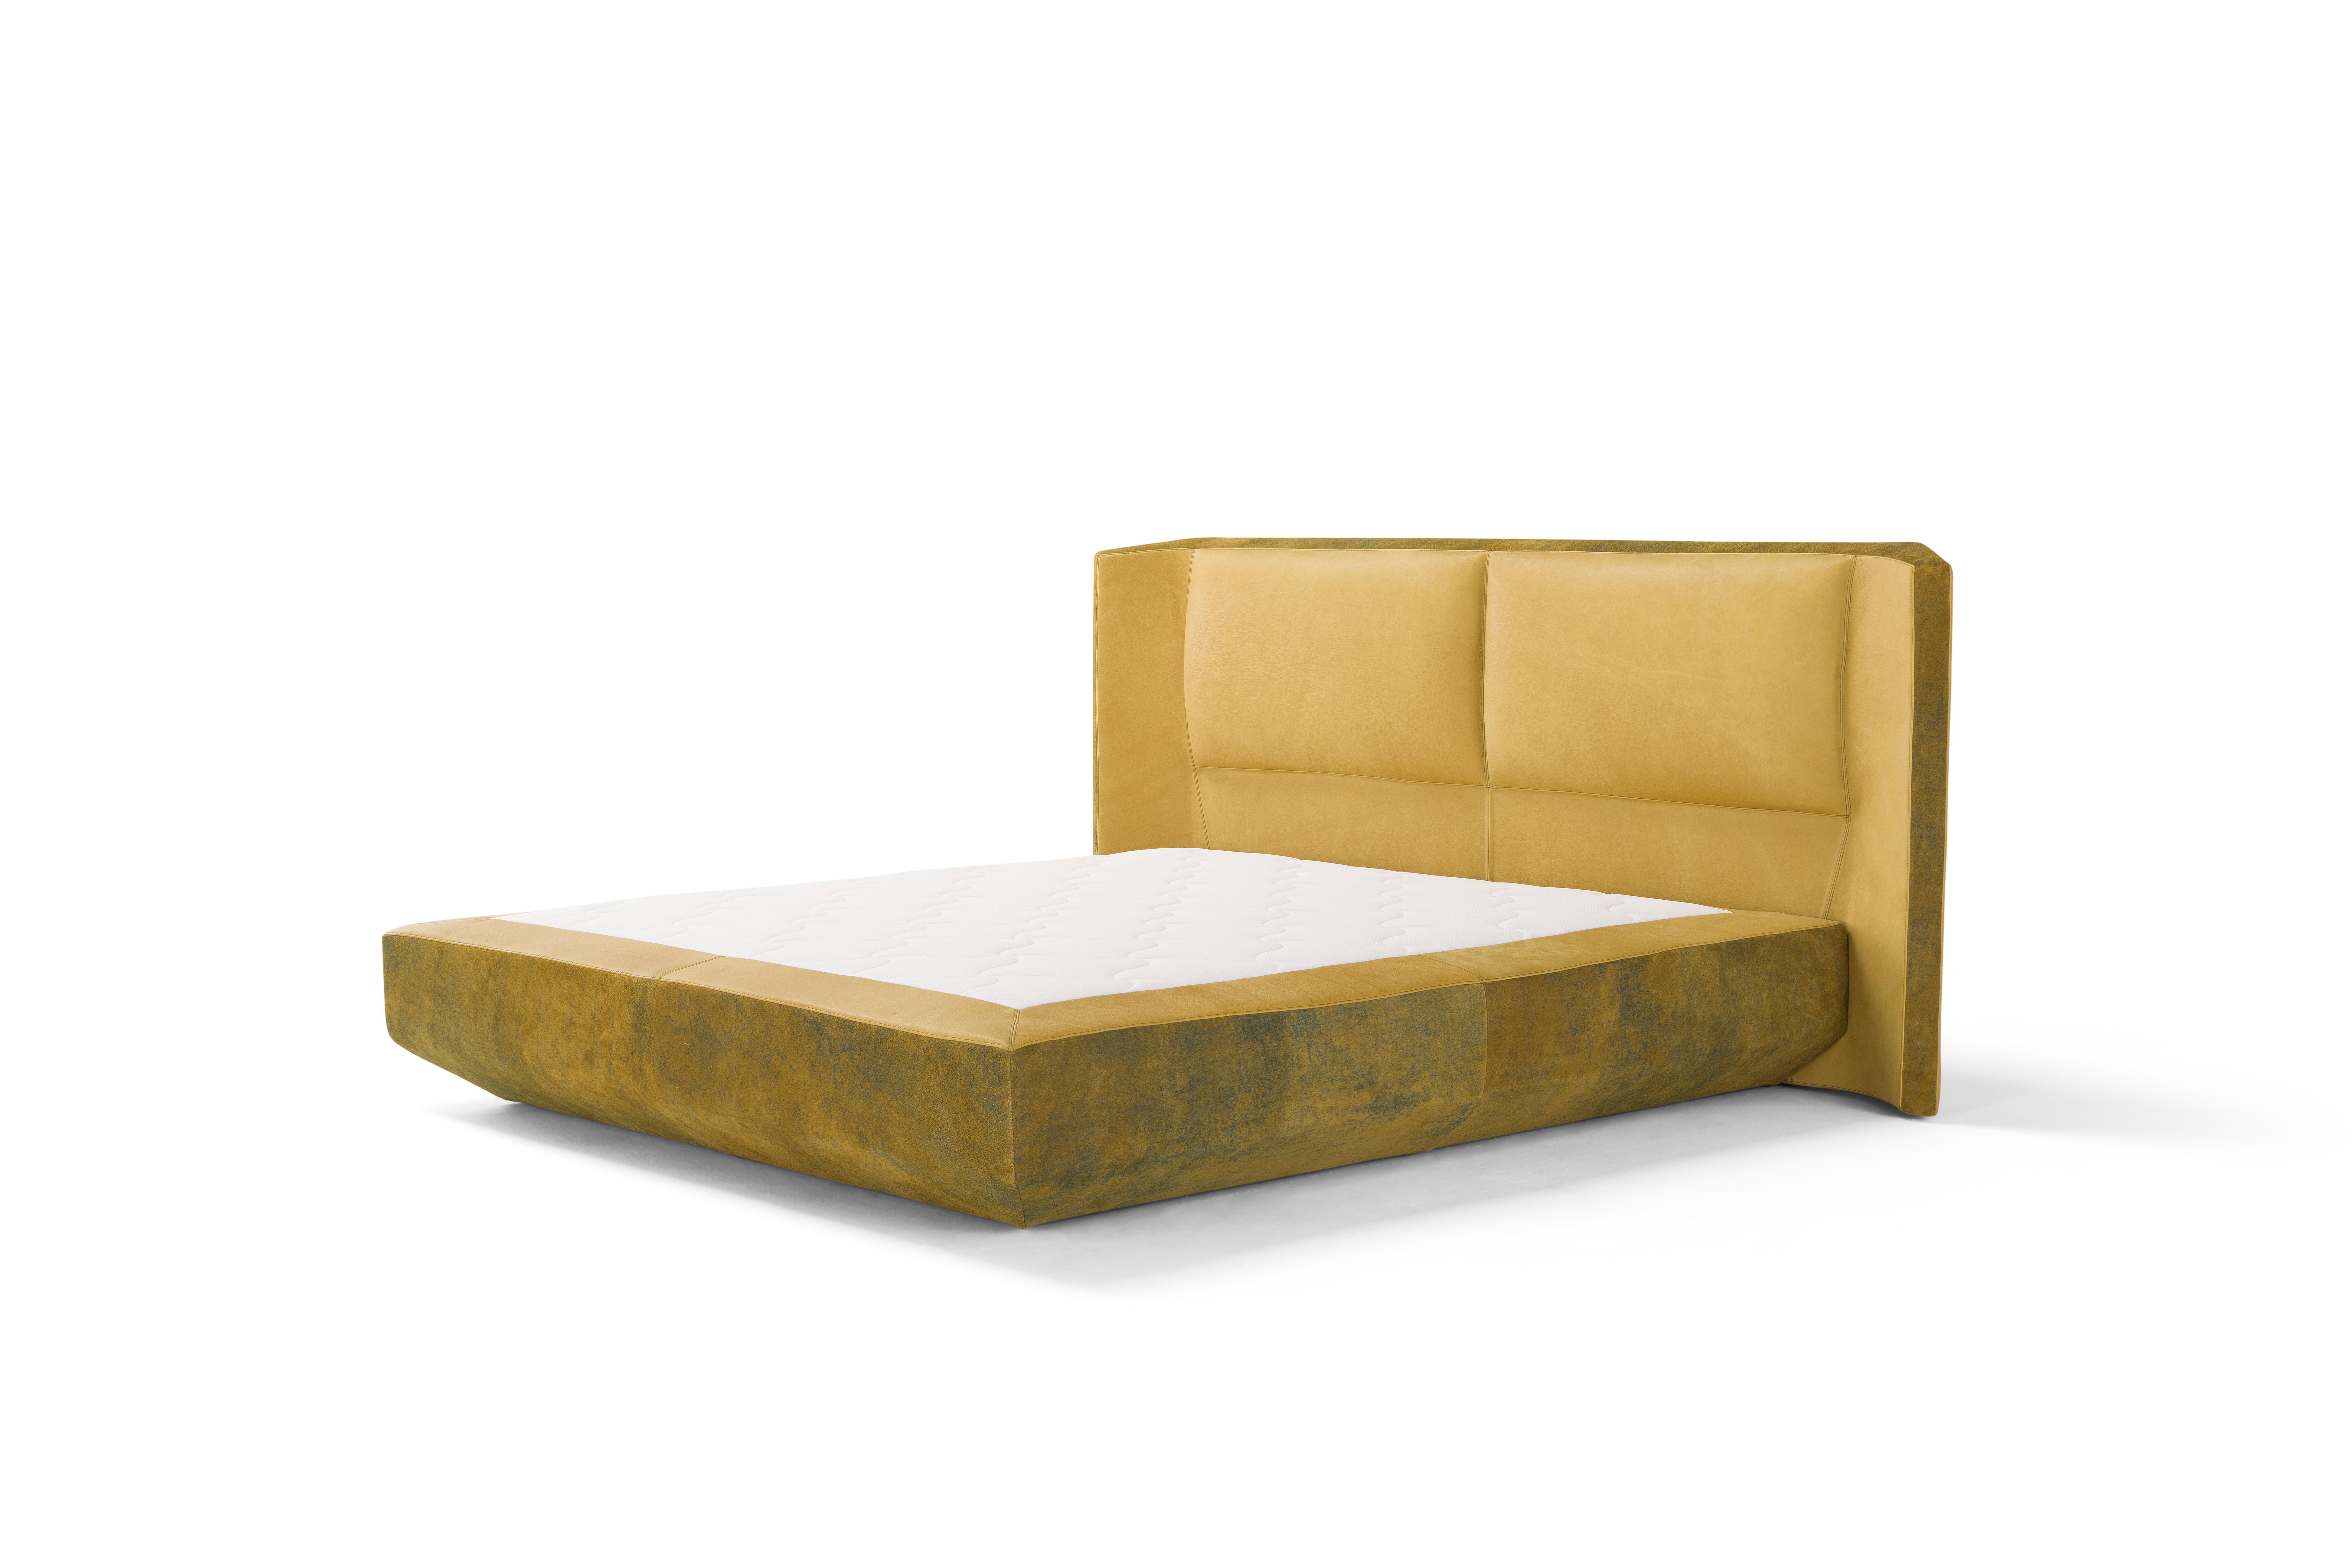 Hand-Crafted Amura 'Panis' Bed in Yellow Leather by Emanuel Gargano For Sale